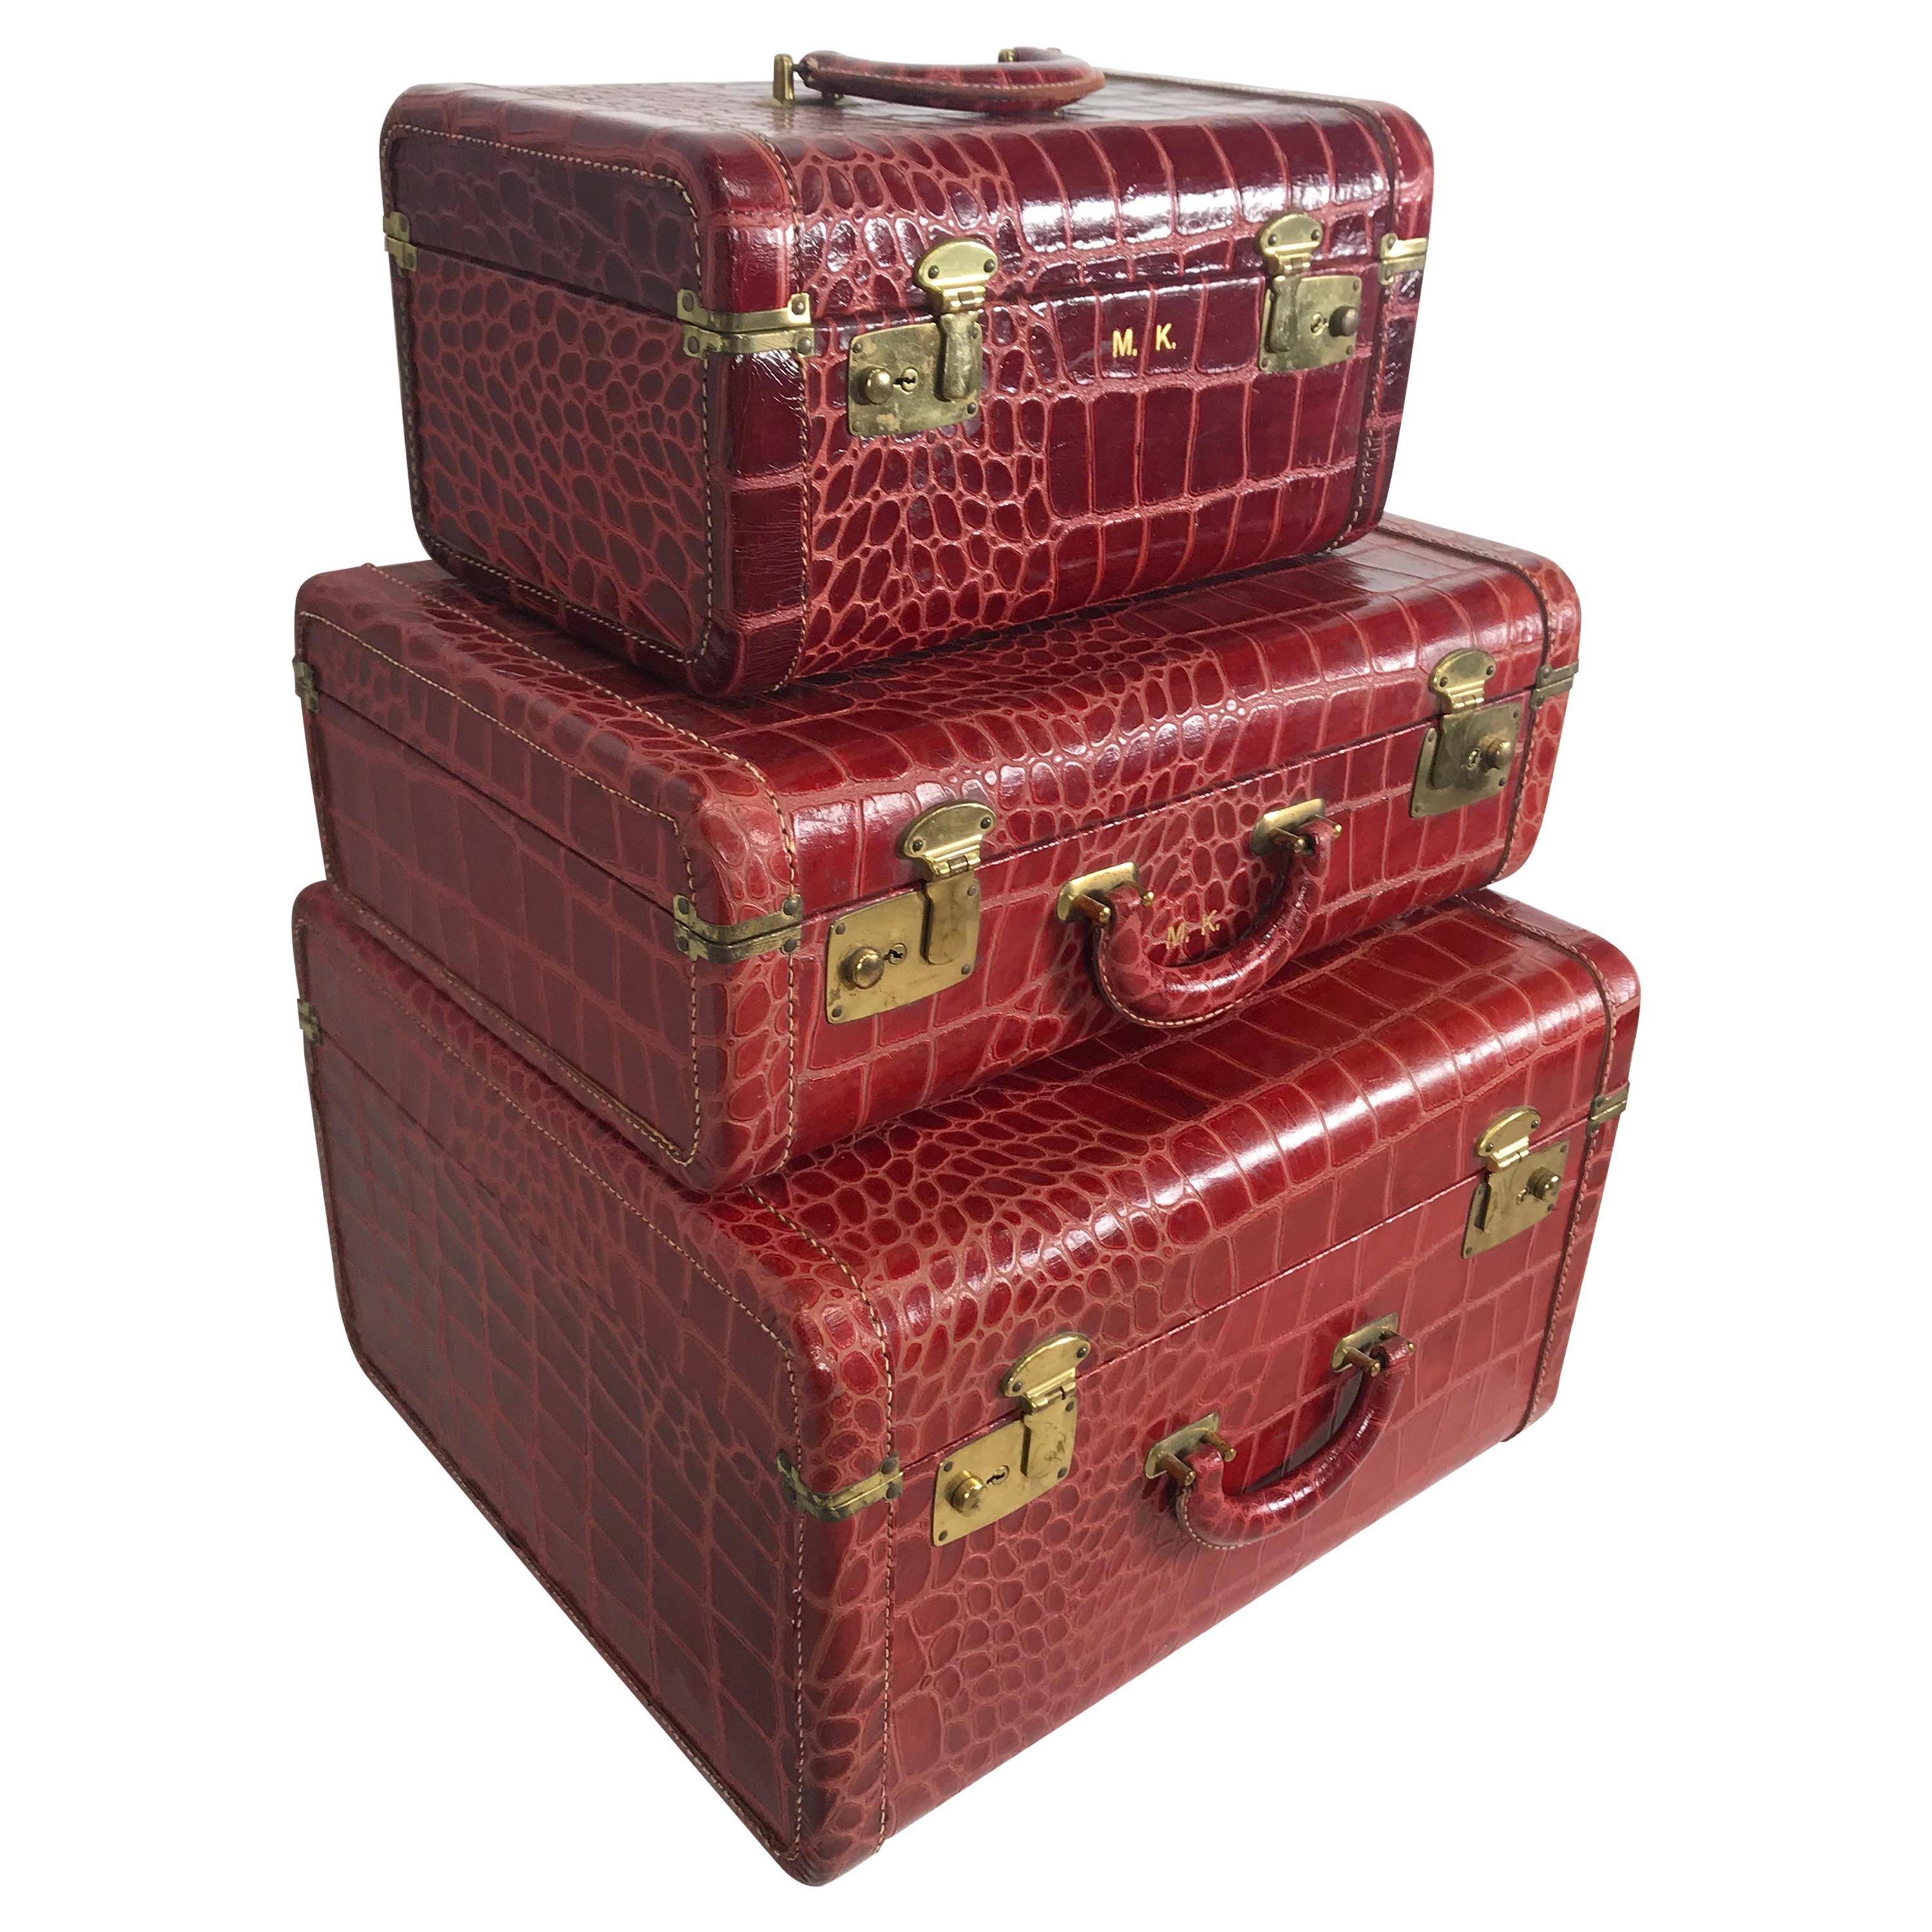 Unusual Set of 3 Red Leather, Faux Alligator Luggage, with Cosmetic Case